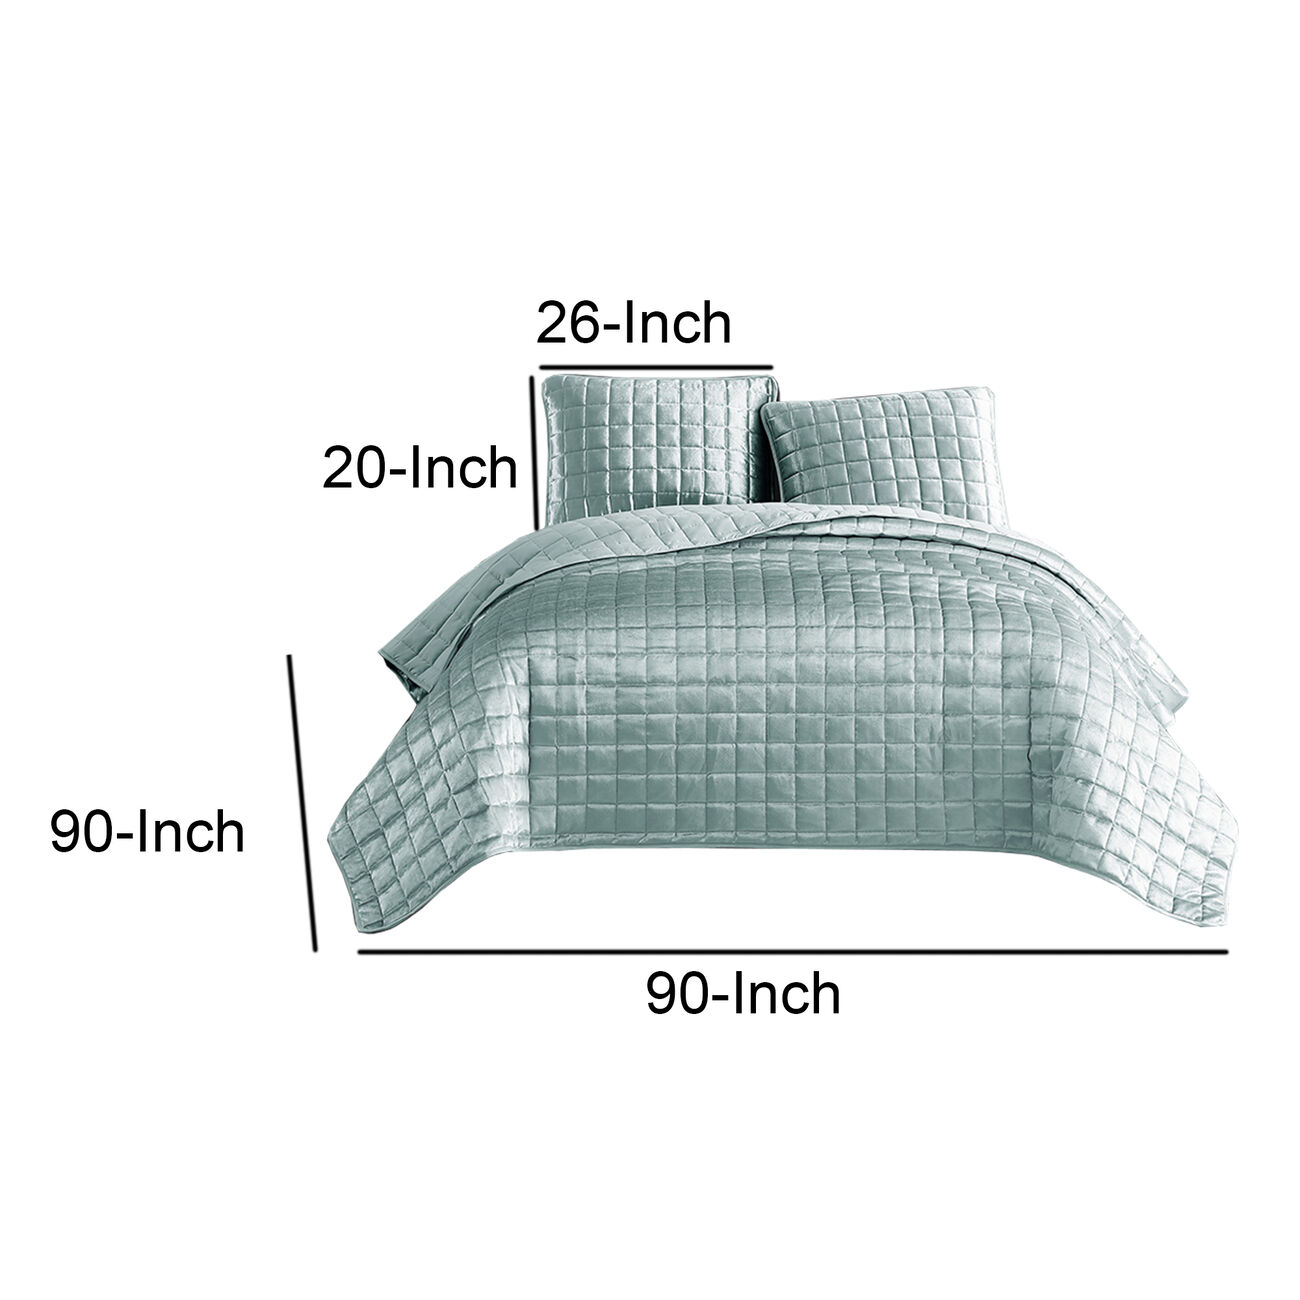 3 Piece Queen Size Coverlet Set with Stitched Square Pattern, Sea Green